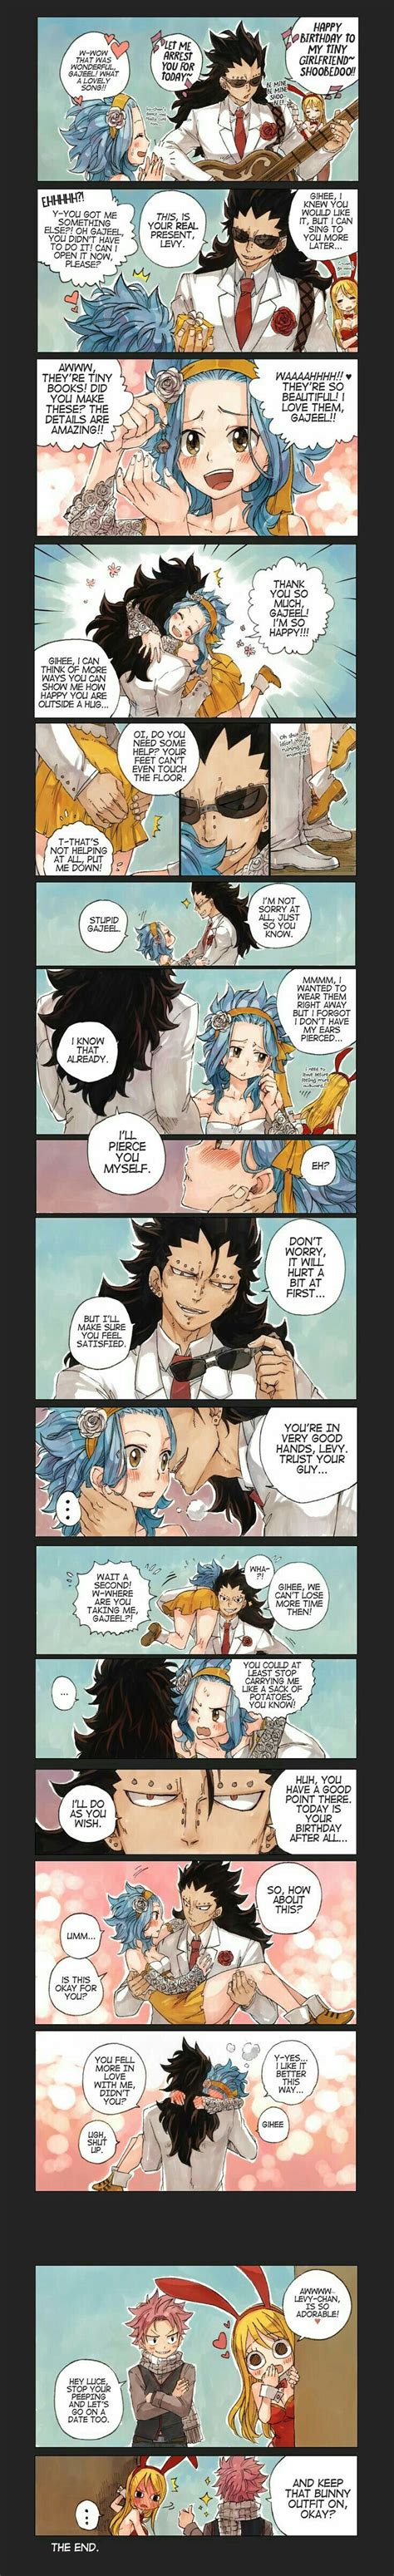 262 best images about gajeel levy life on pinterest white day couple and levis